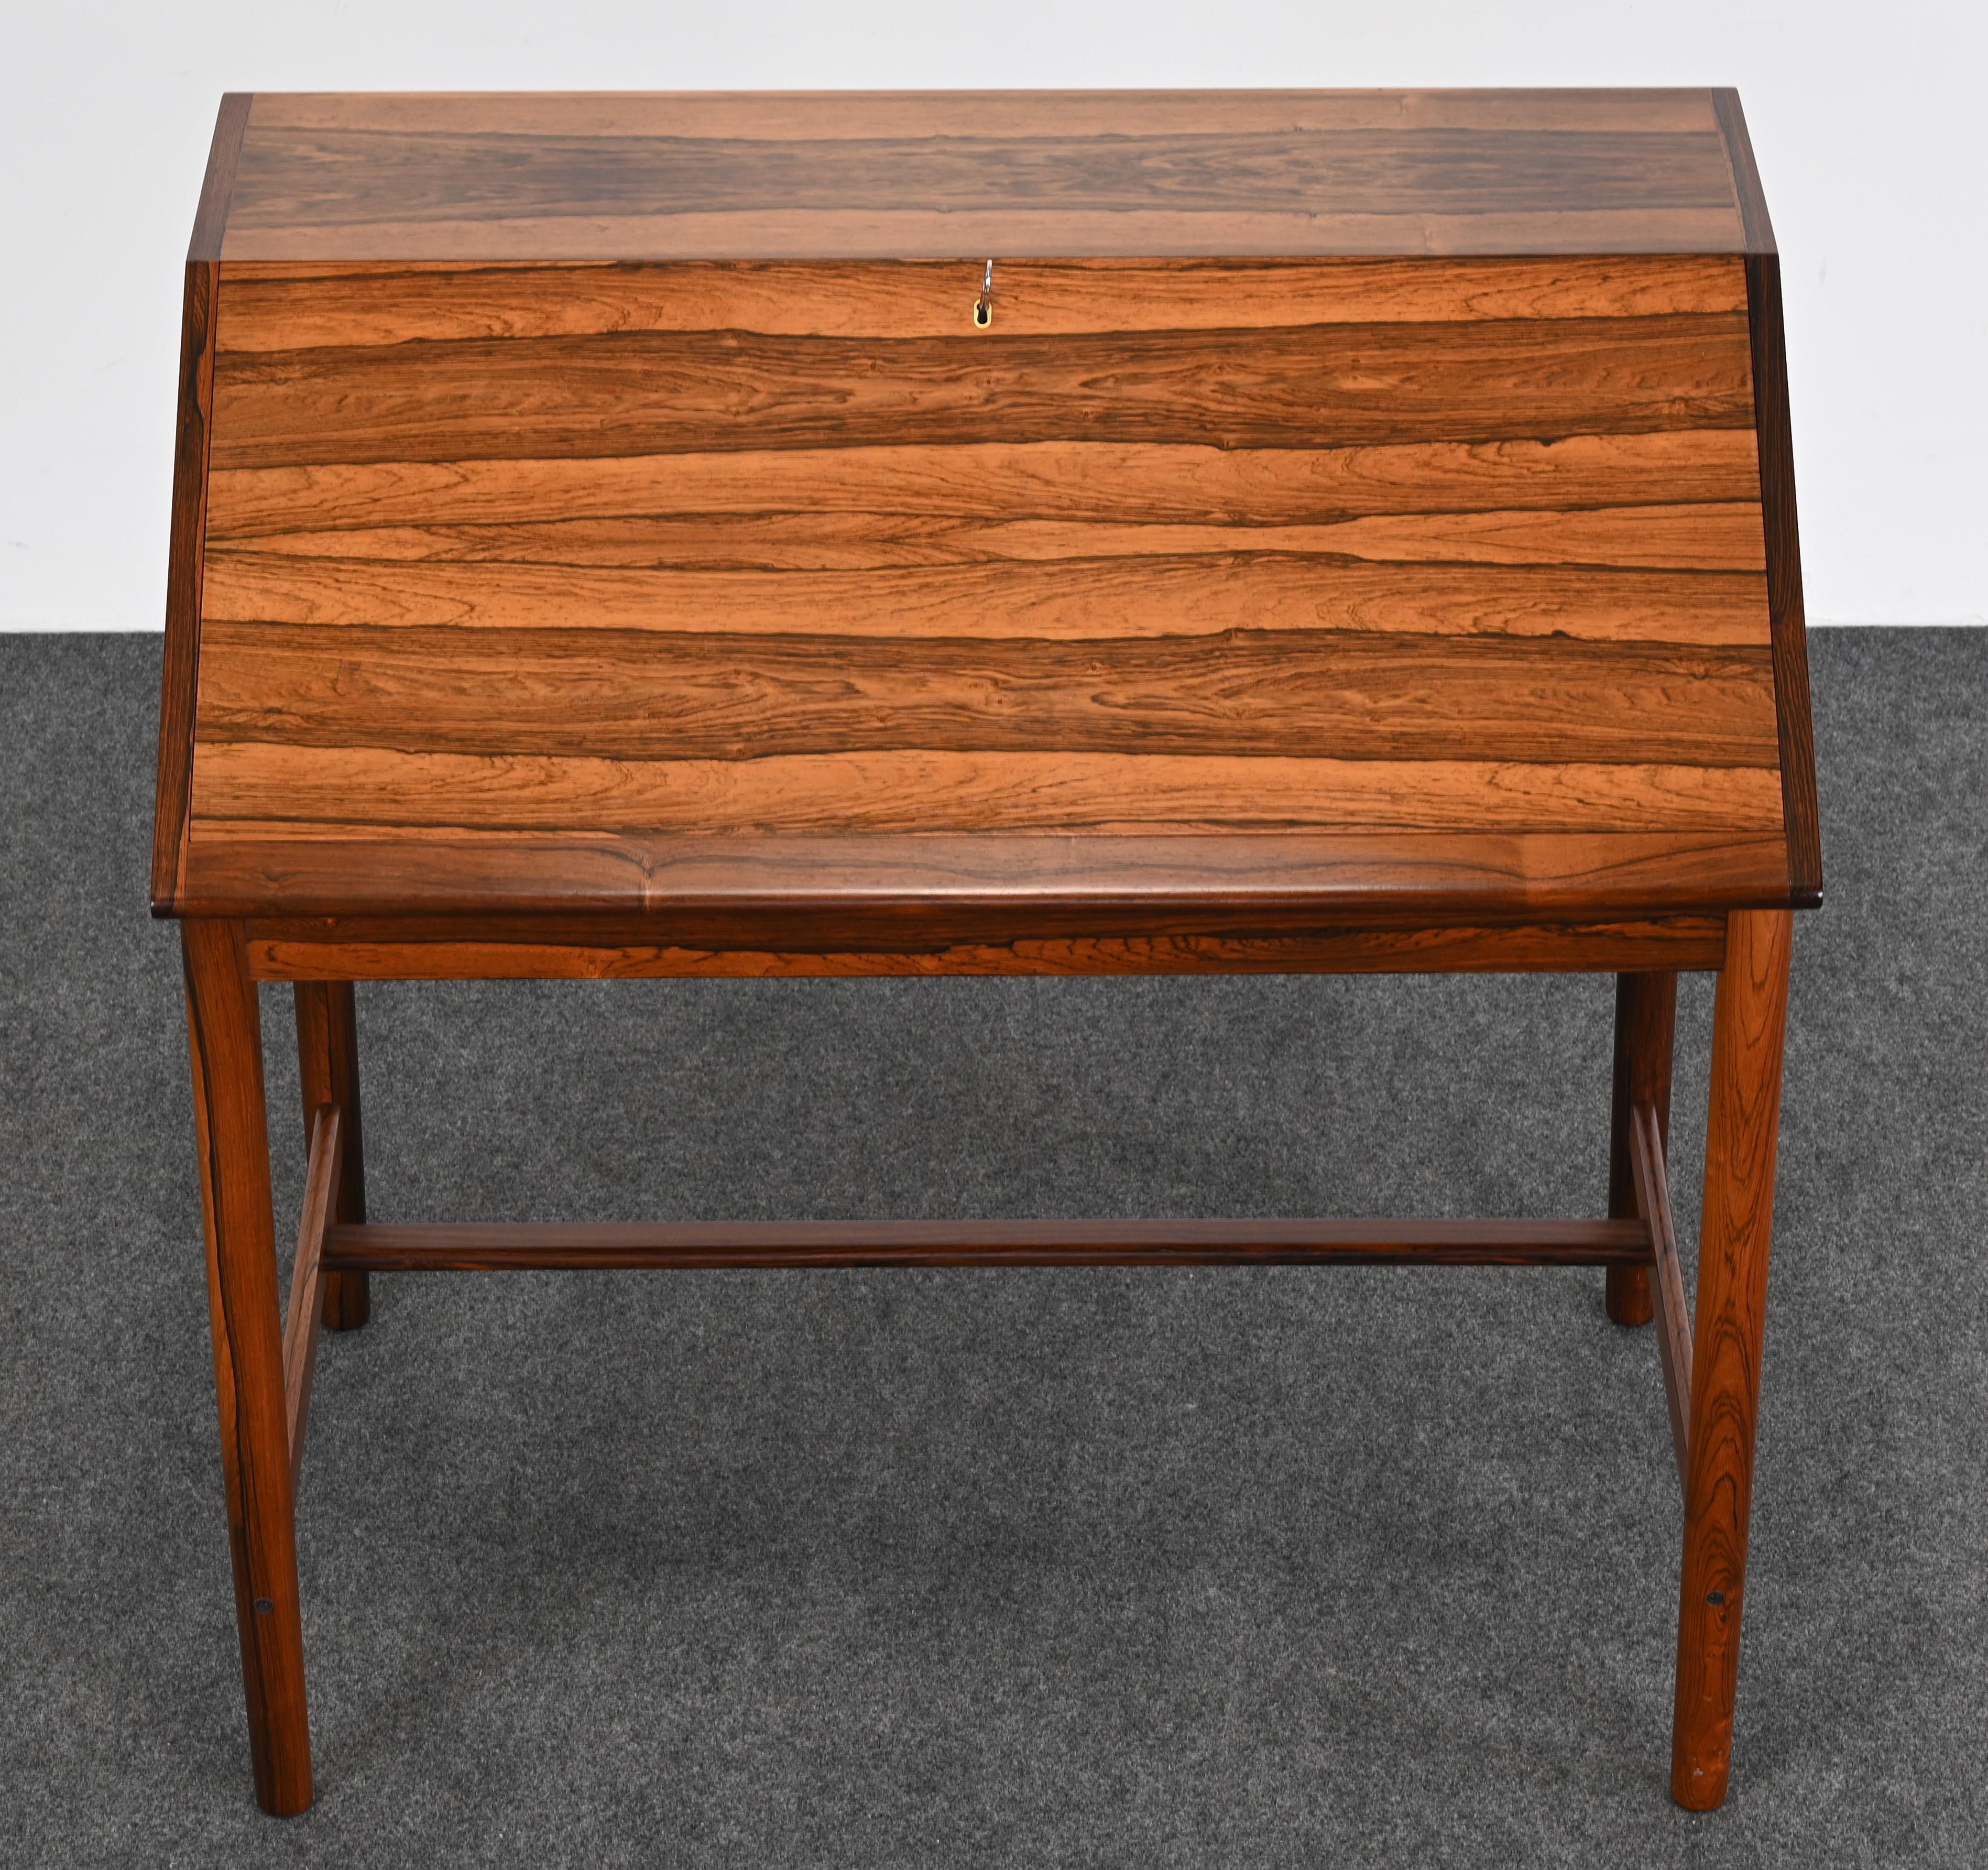 A stunning and very beautiful Rosewood Desk for Brode Blindheim by Sykky Iven circa 1960s. This amazing slant front desk is structured on a refined stretcher base. The cabinet has wonderful rosewood graining with warm amber tones. The interior is